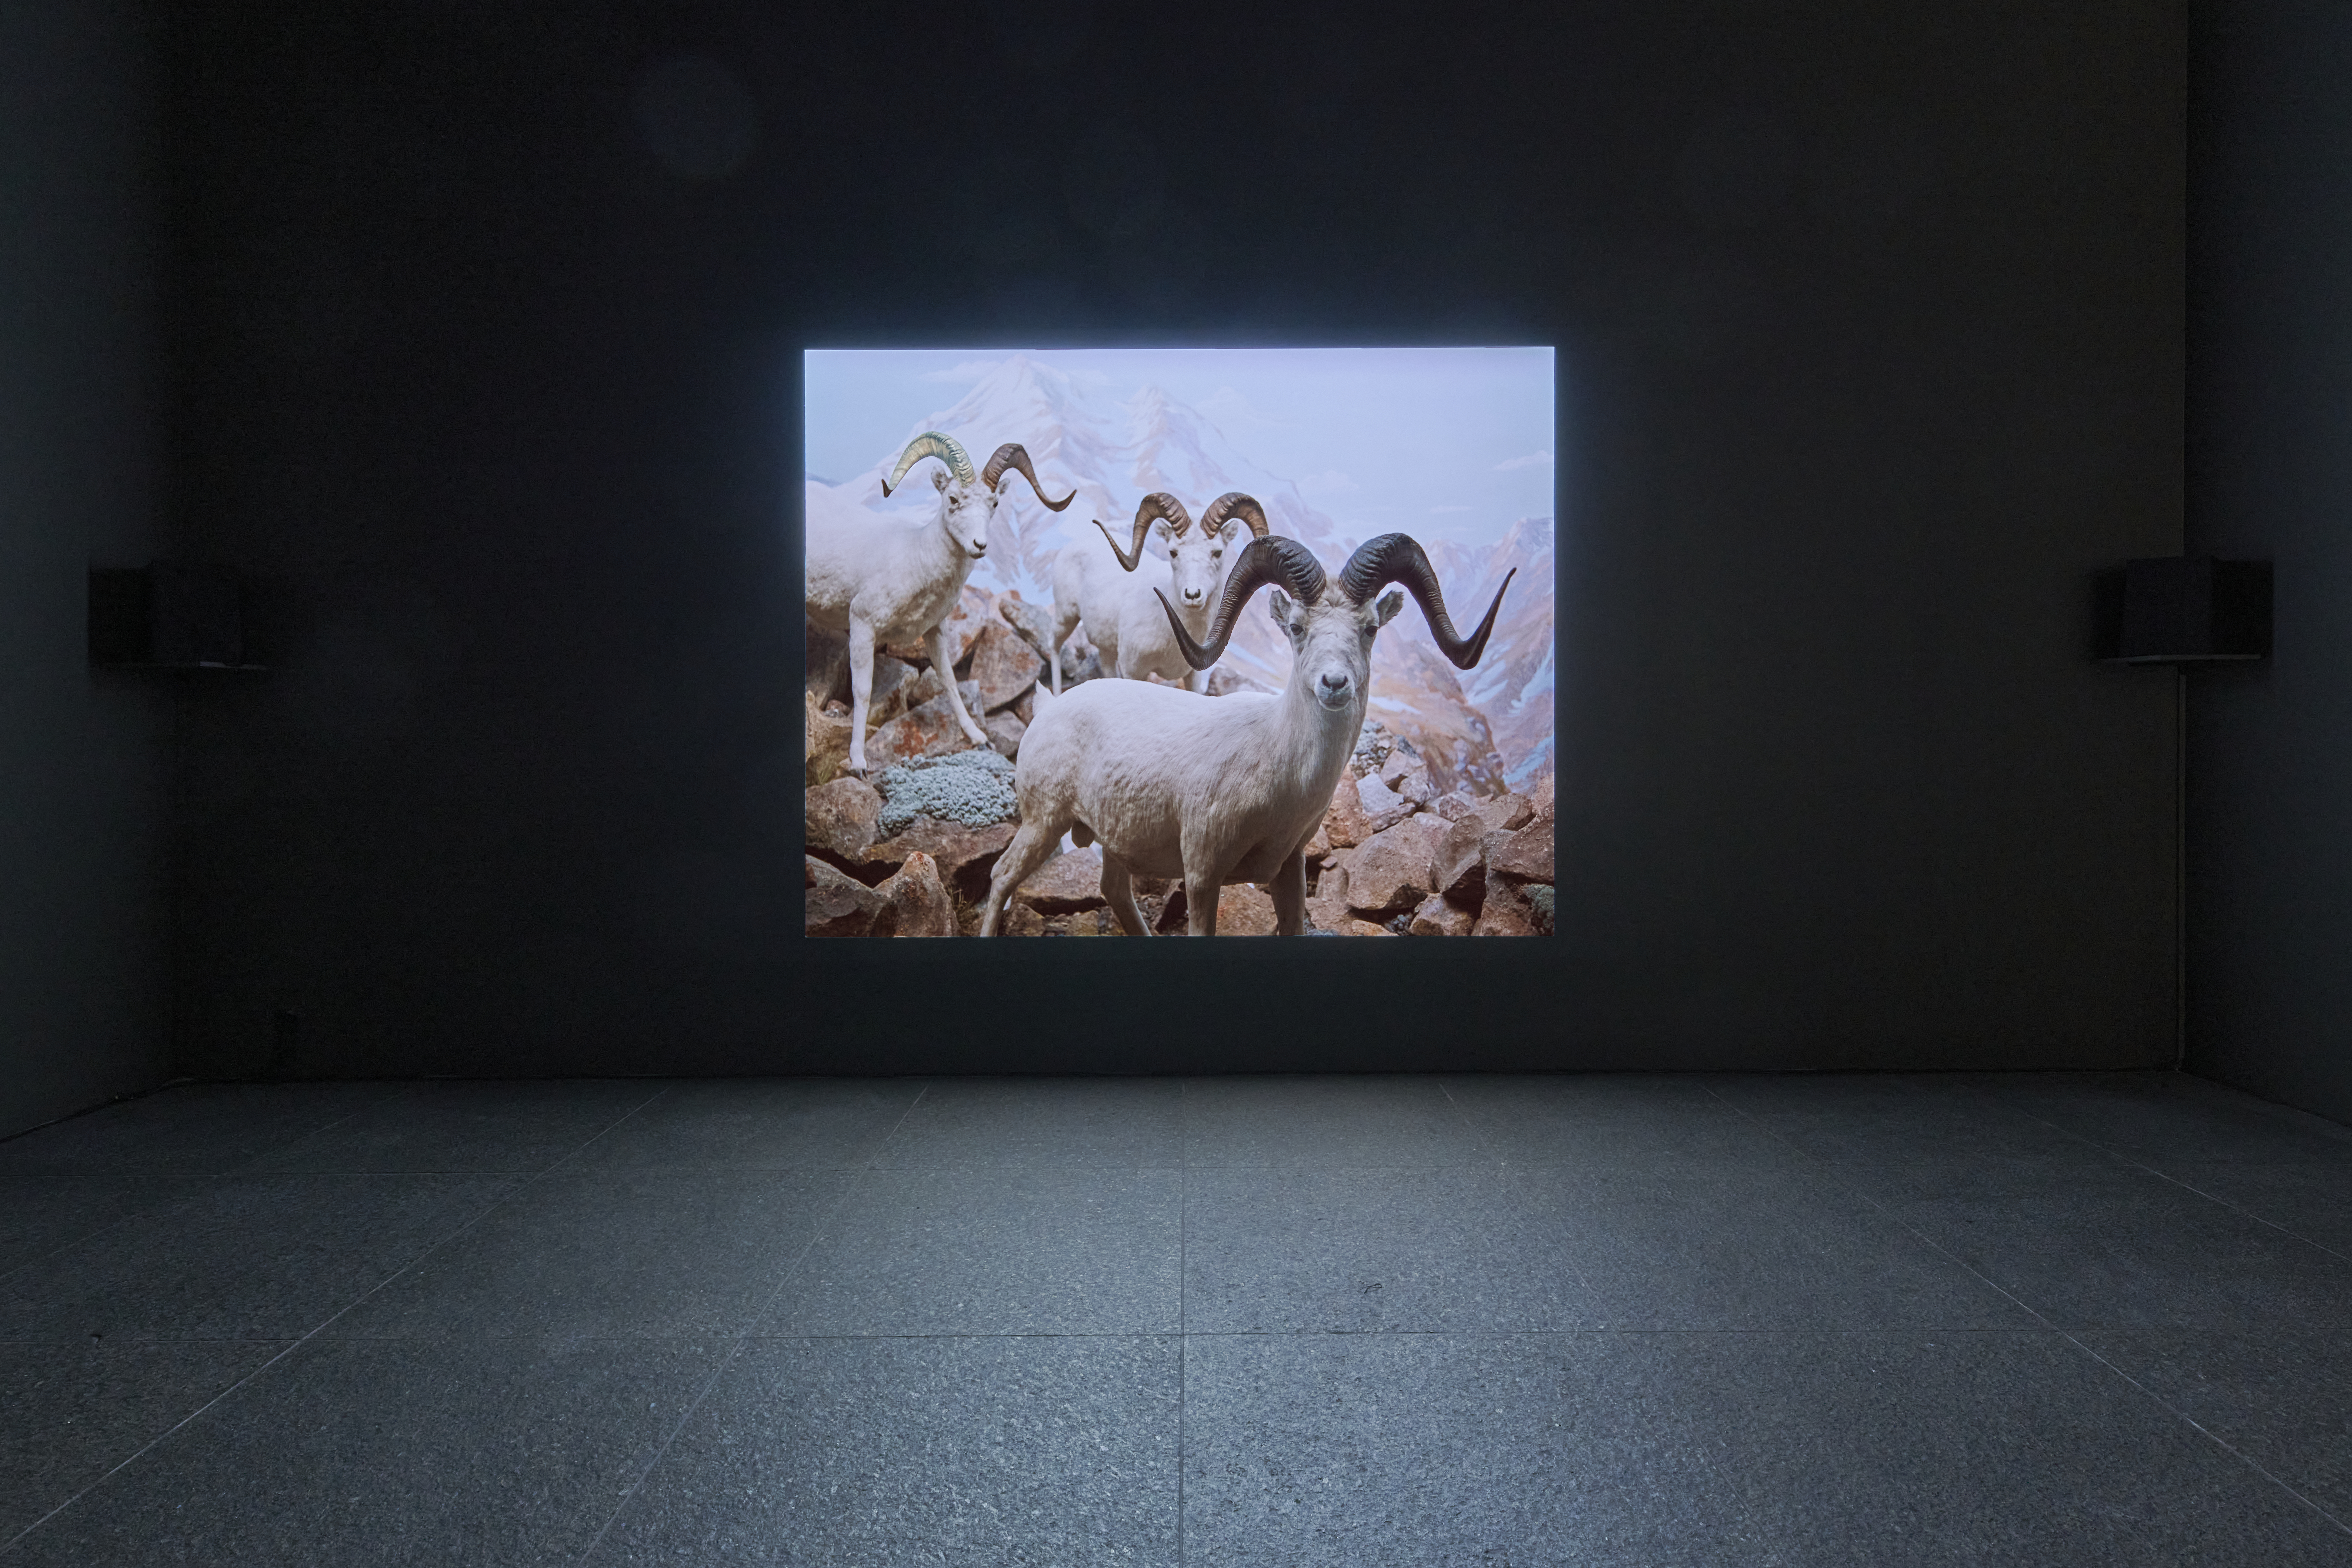 installation view of Amie Siegel featuring goats in the background